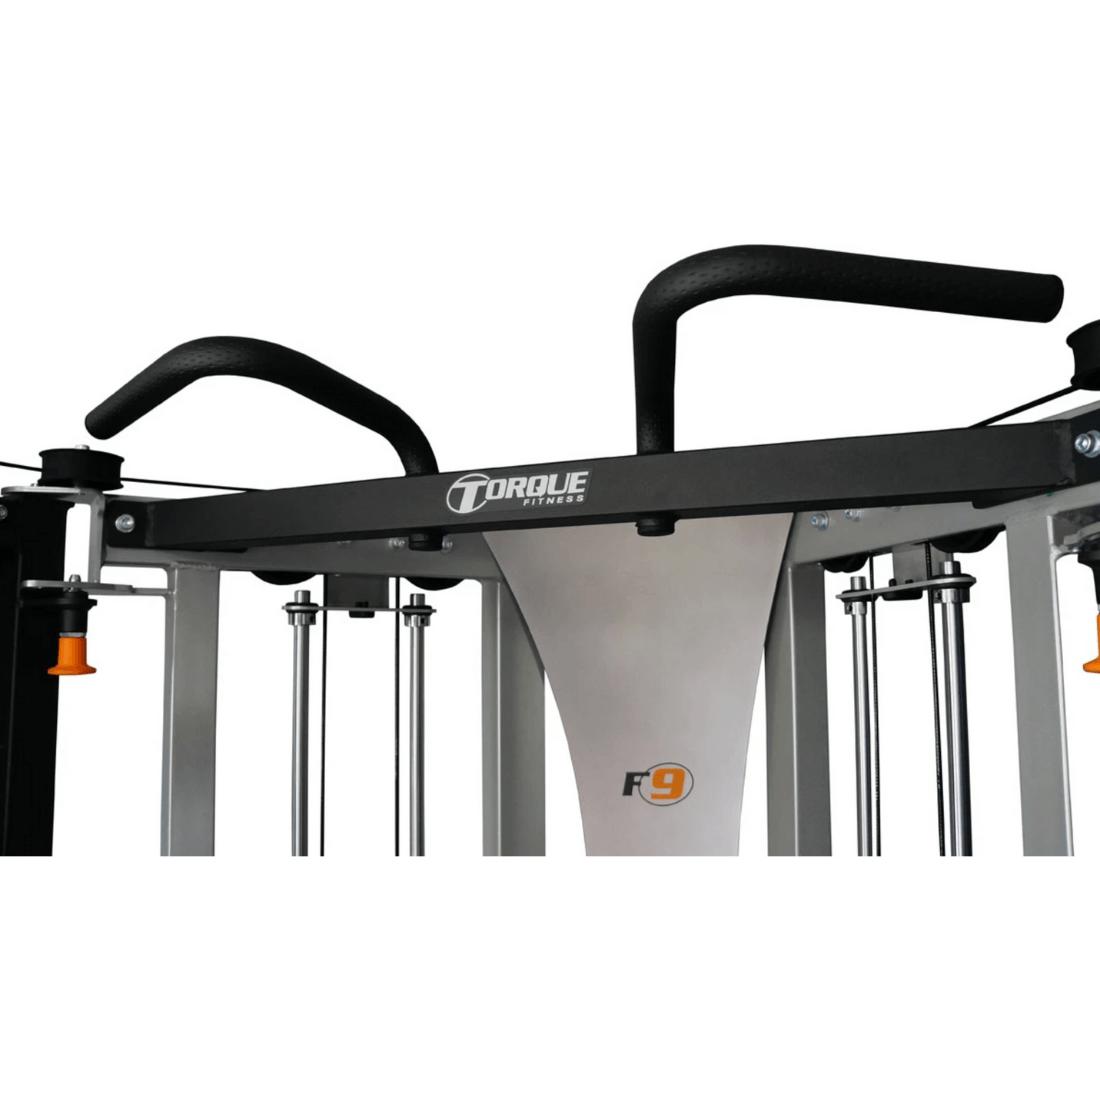 Torque F9 Fold-Away Functional Trainer Pull Up Bars